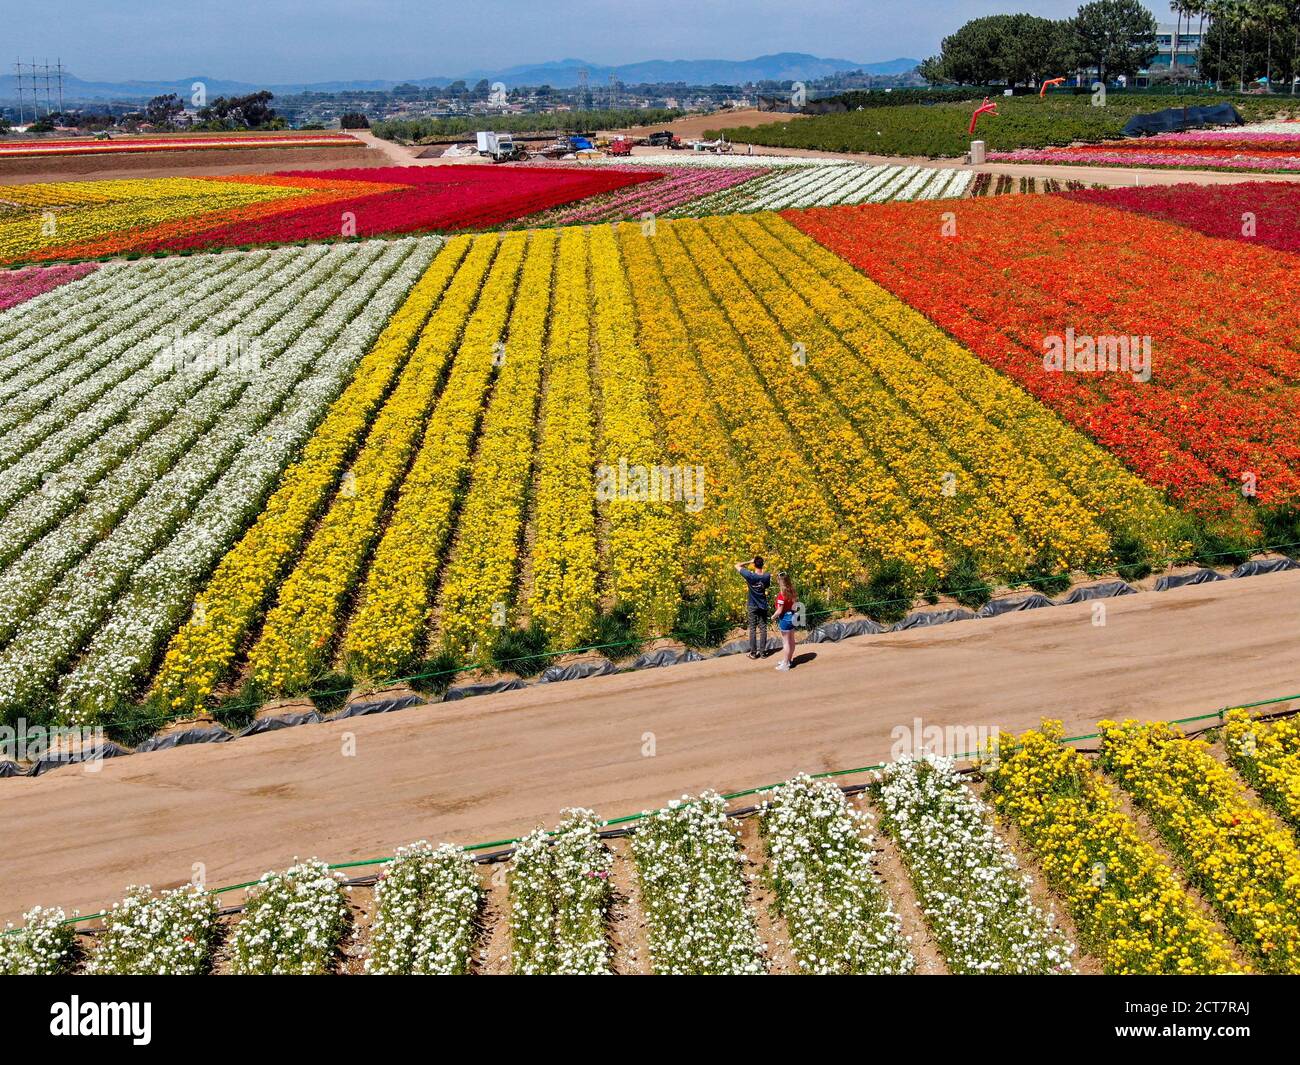 Aerial view of Carlsbad Flower Fields. tourist can enjoy hillsides of colorful Giant Ranunculus flowers during the annual bloom that runs March through mid May. Carlsbad, California, USA. March 22, 2020 Stock Photo